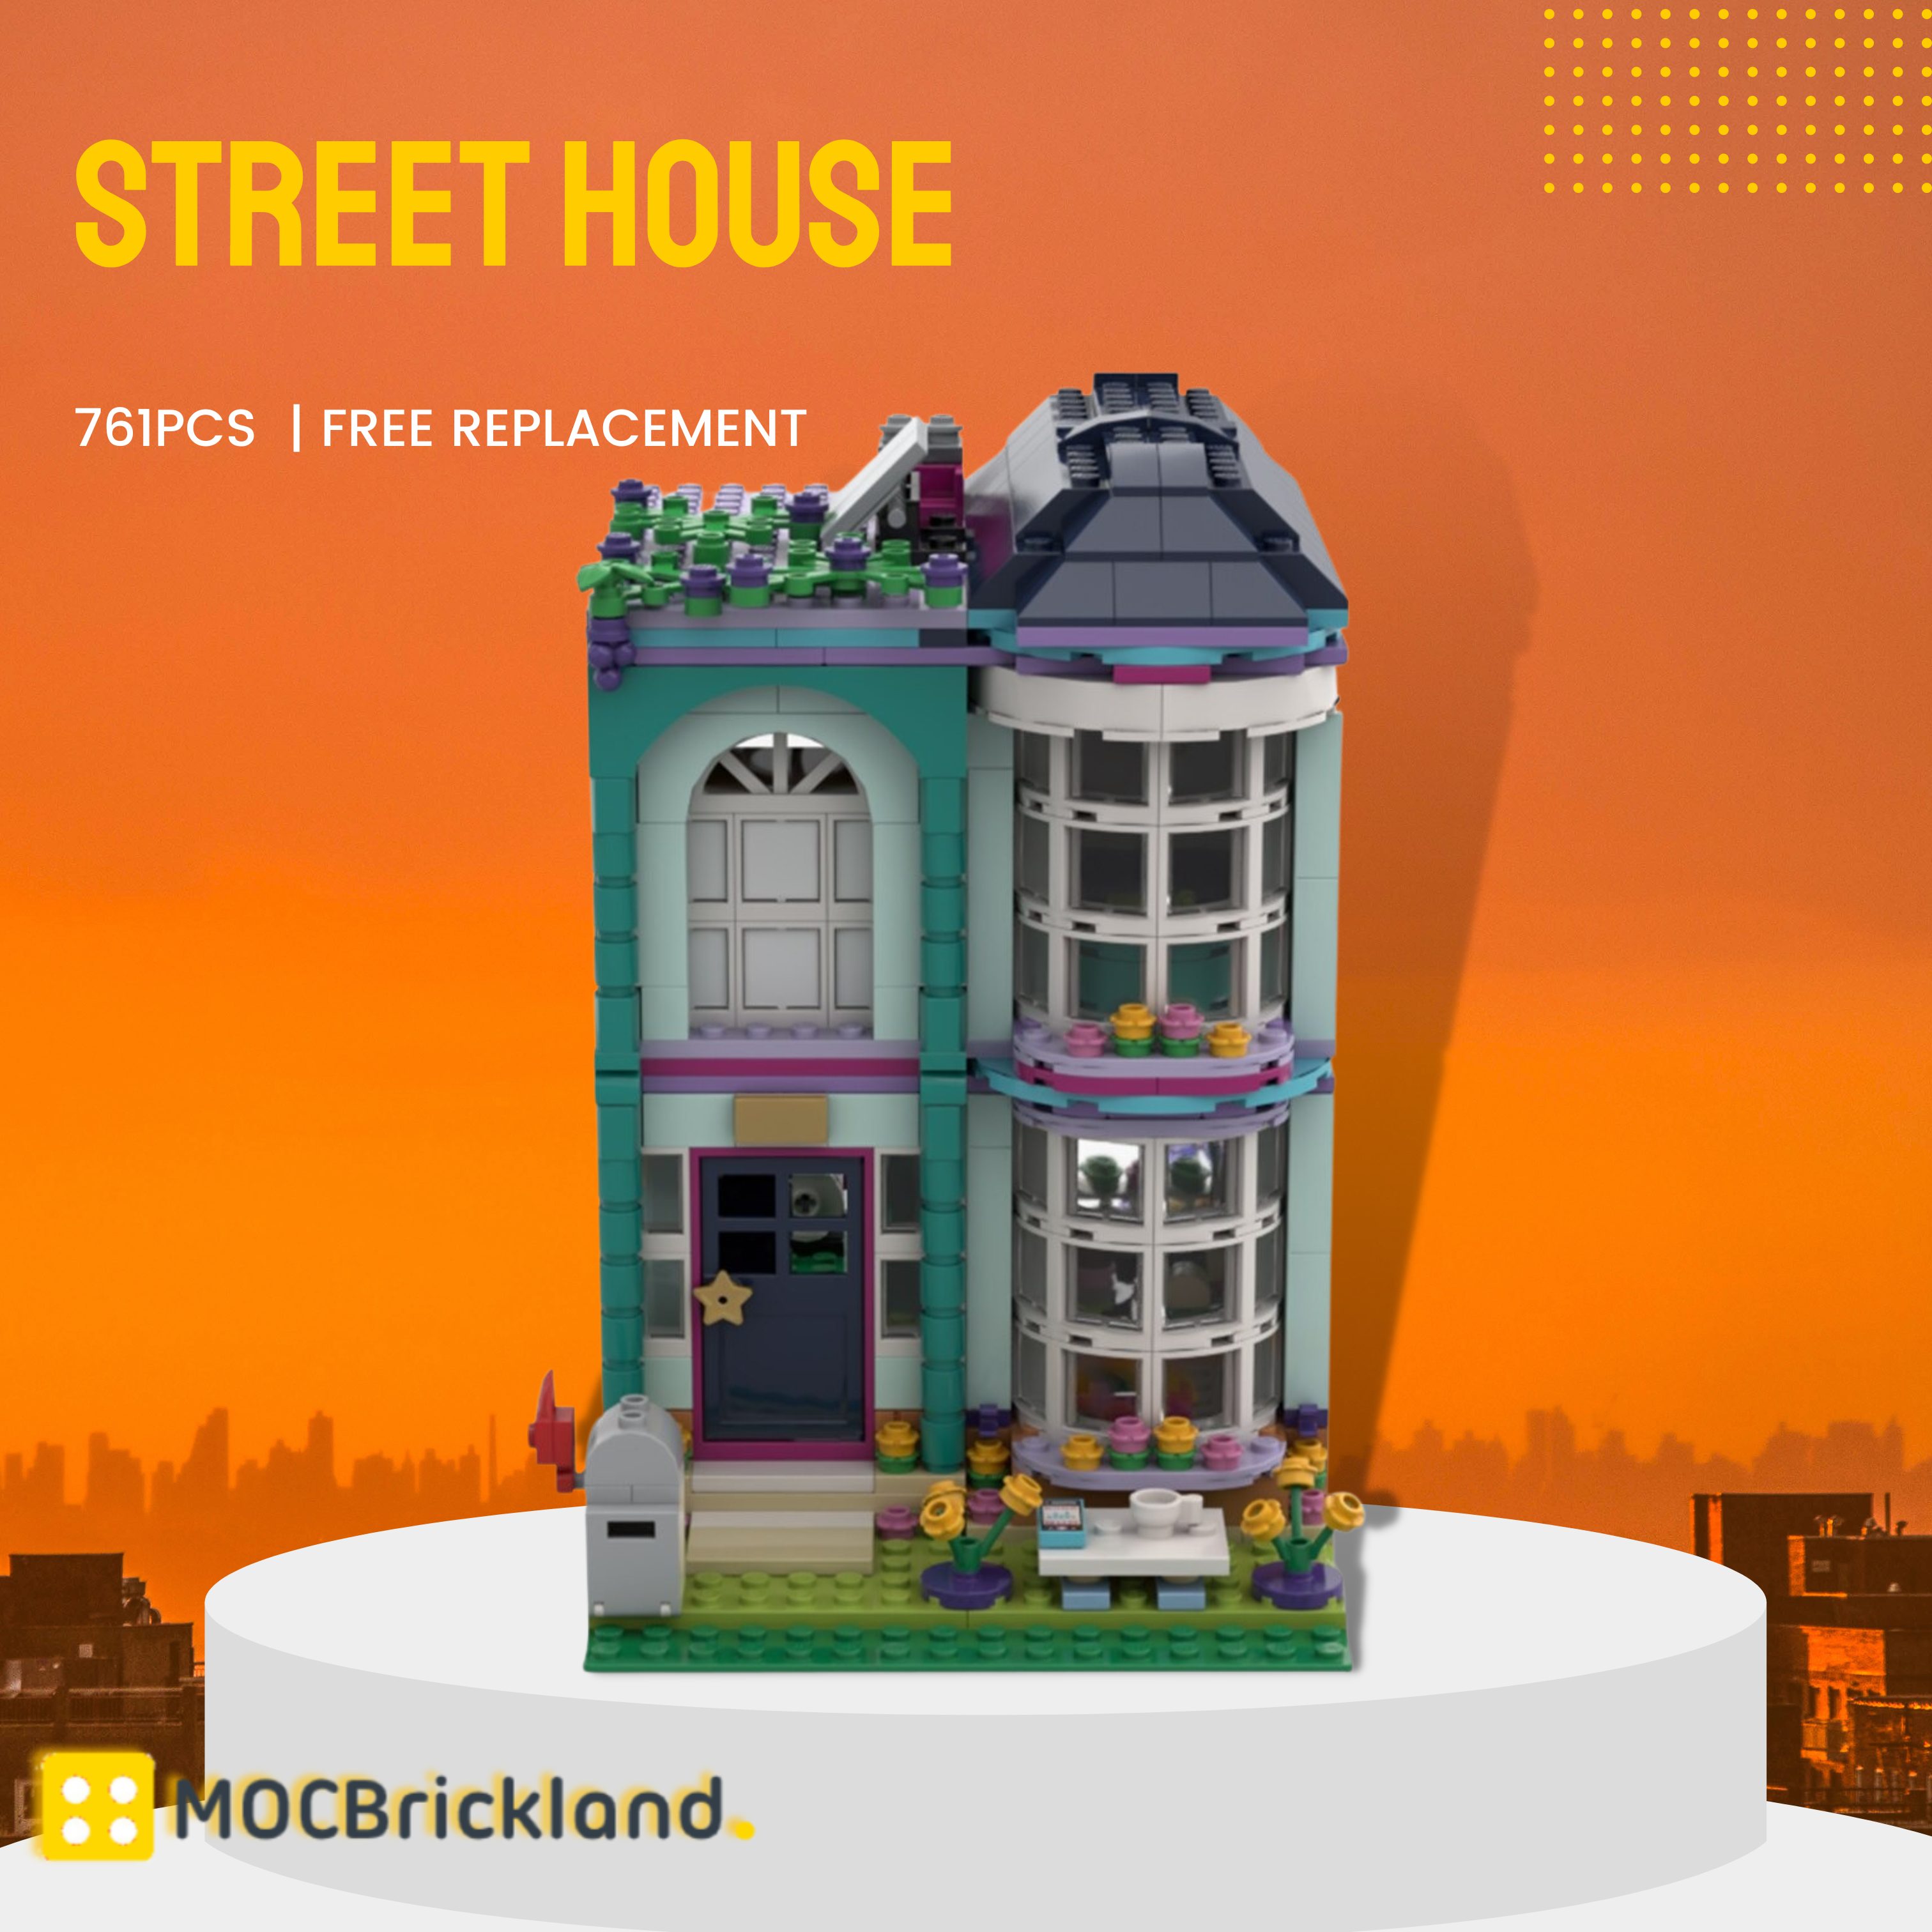 Street House Street View MOC-114621 Modular Building With 761PCS